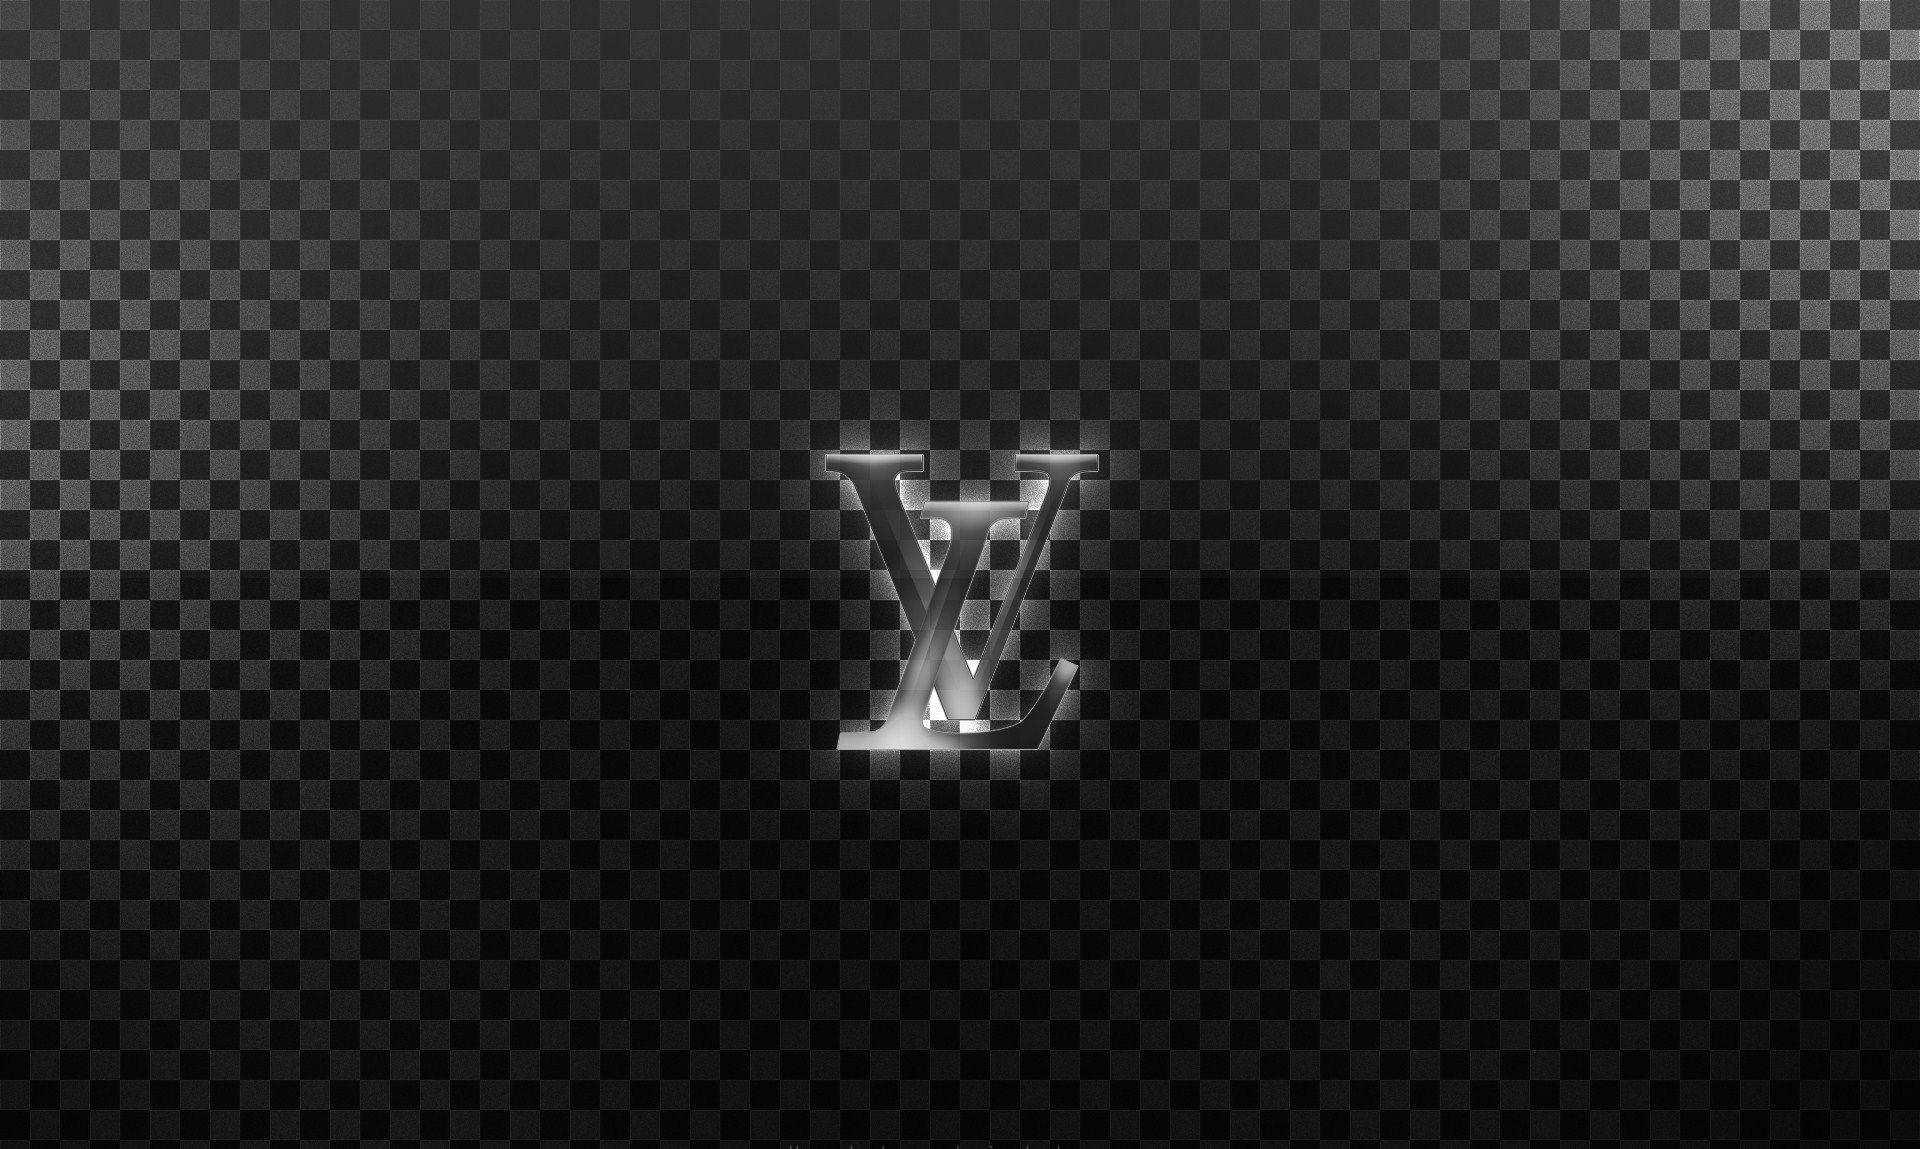 LV_Damier_iPhone, After the Damier Graphite wallpaper prove…